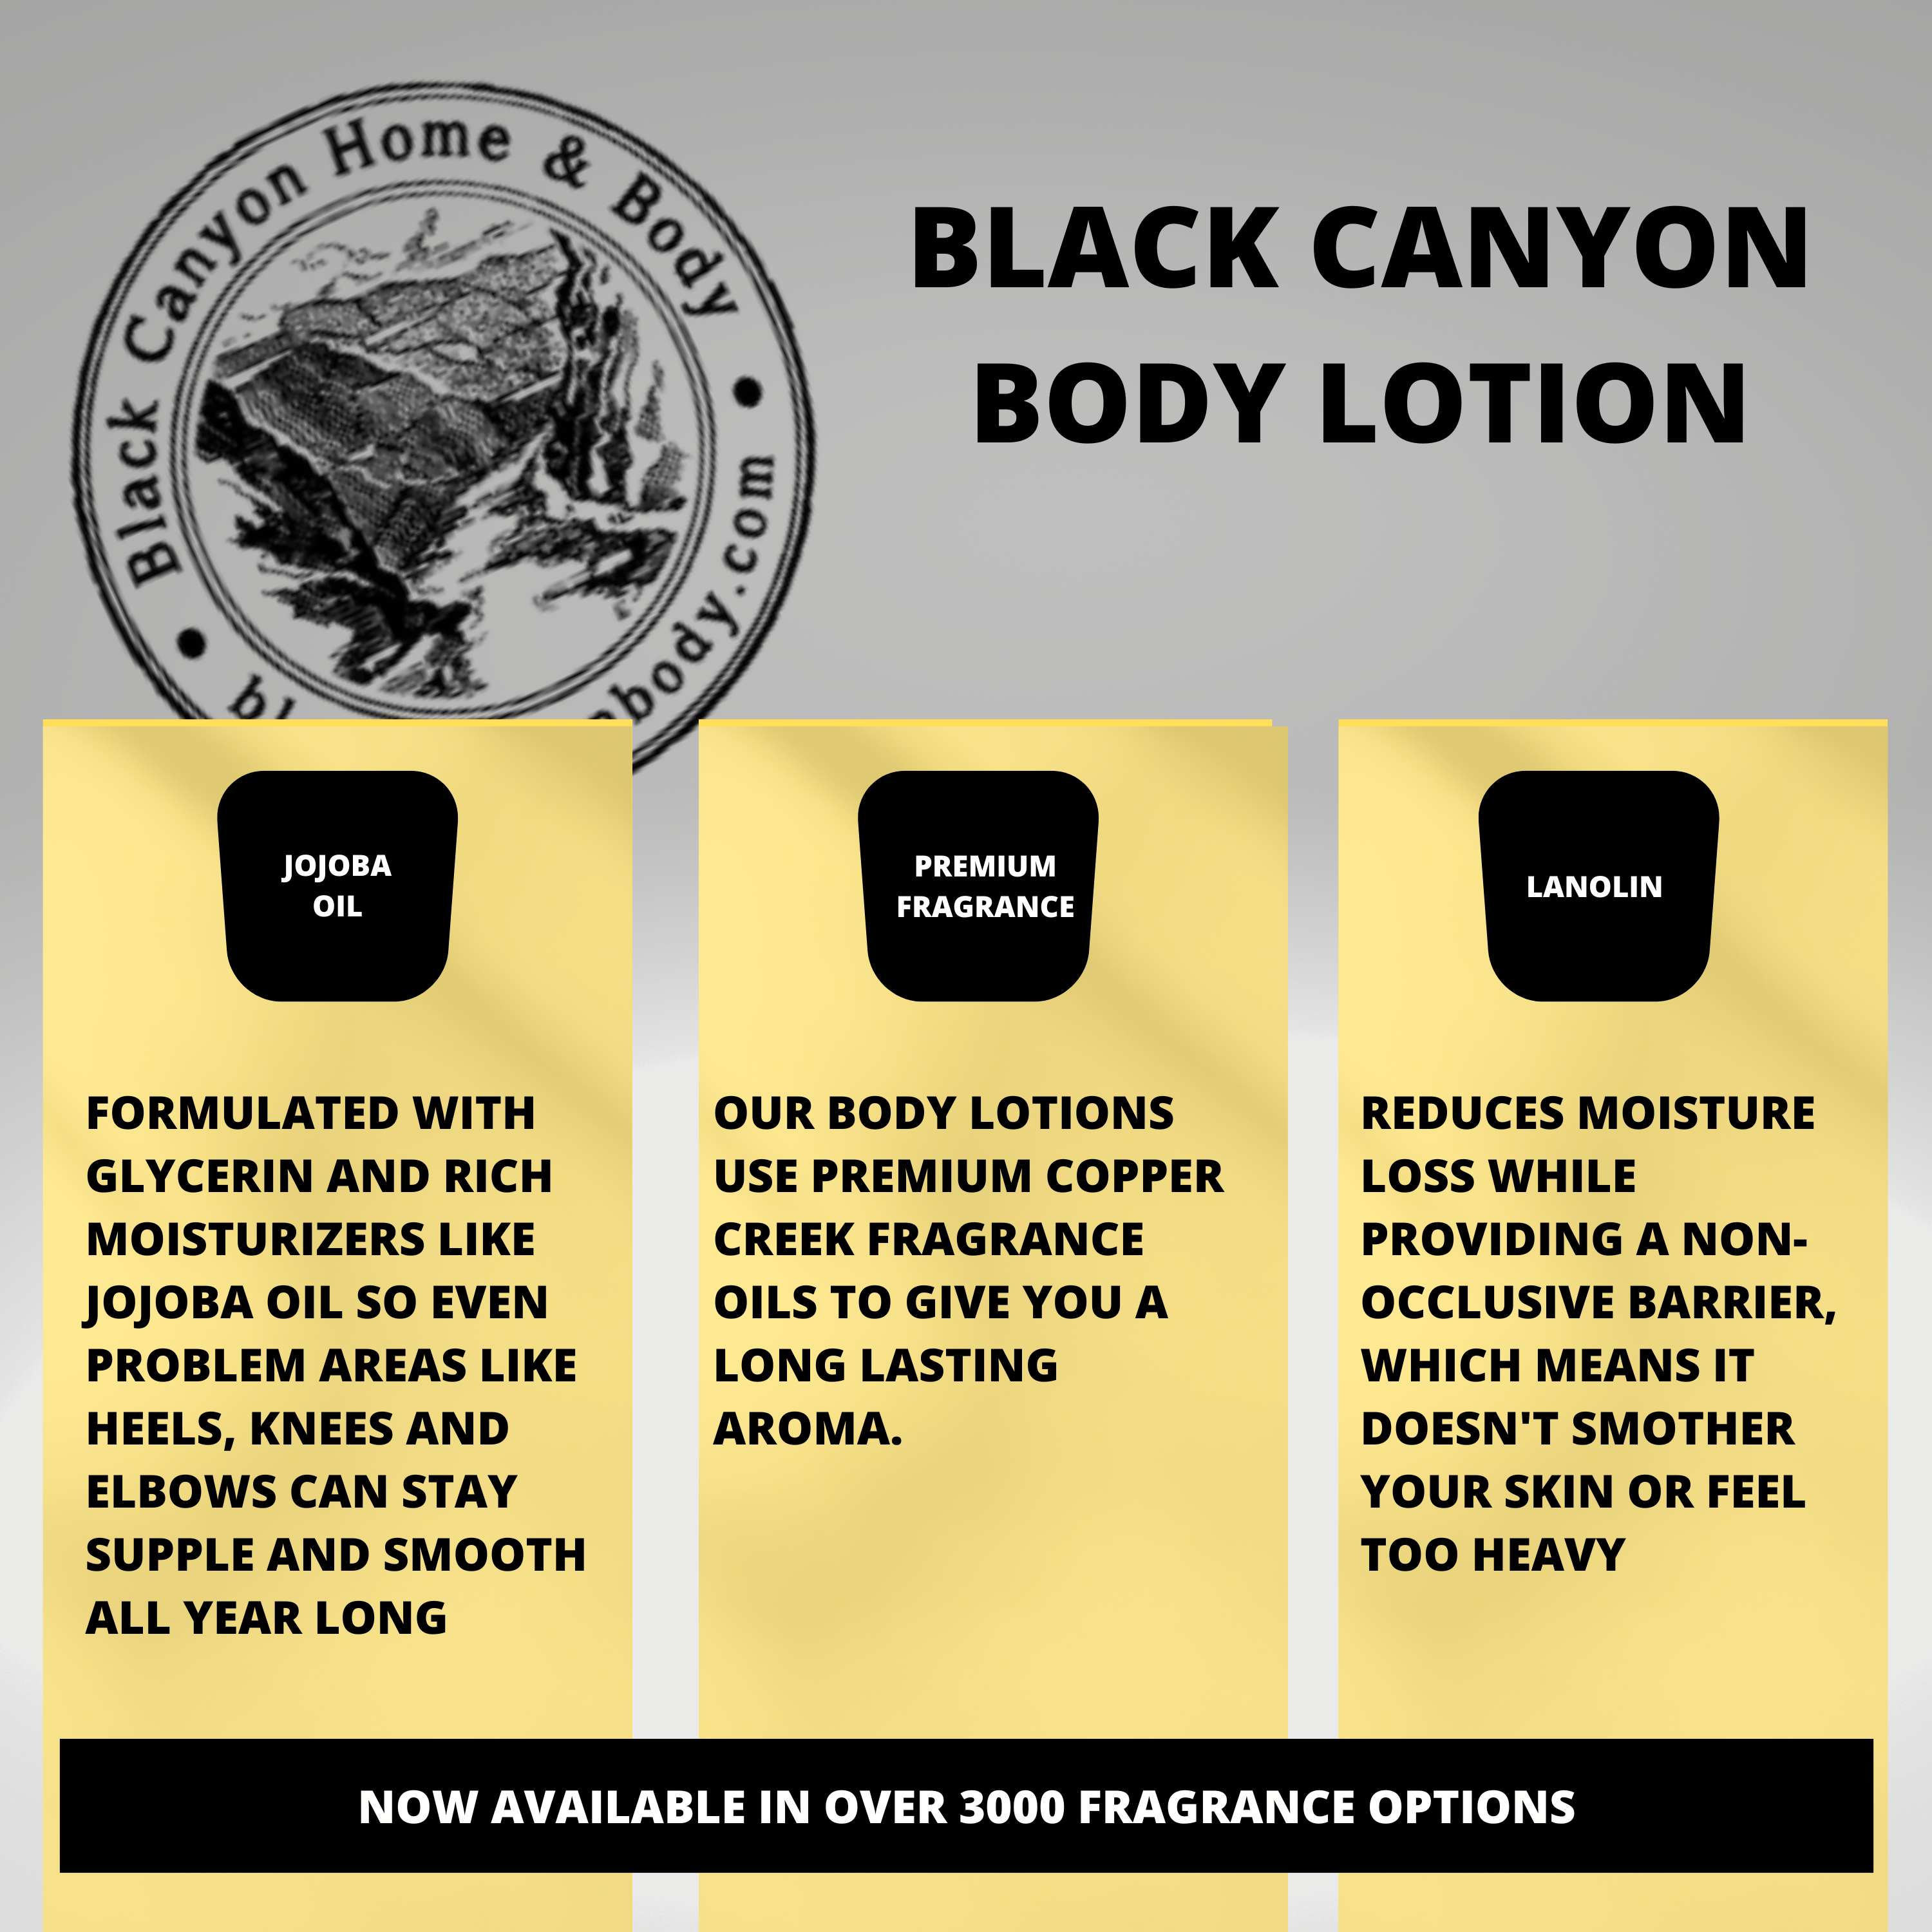 Black Canyon Daffodil Dream Scented Luxury Body Lotion with Lanolin and Jojoba Oil